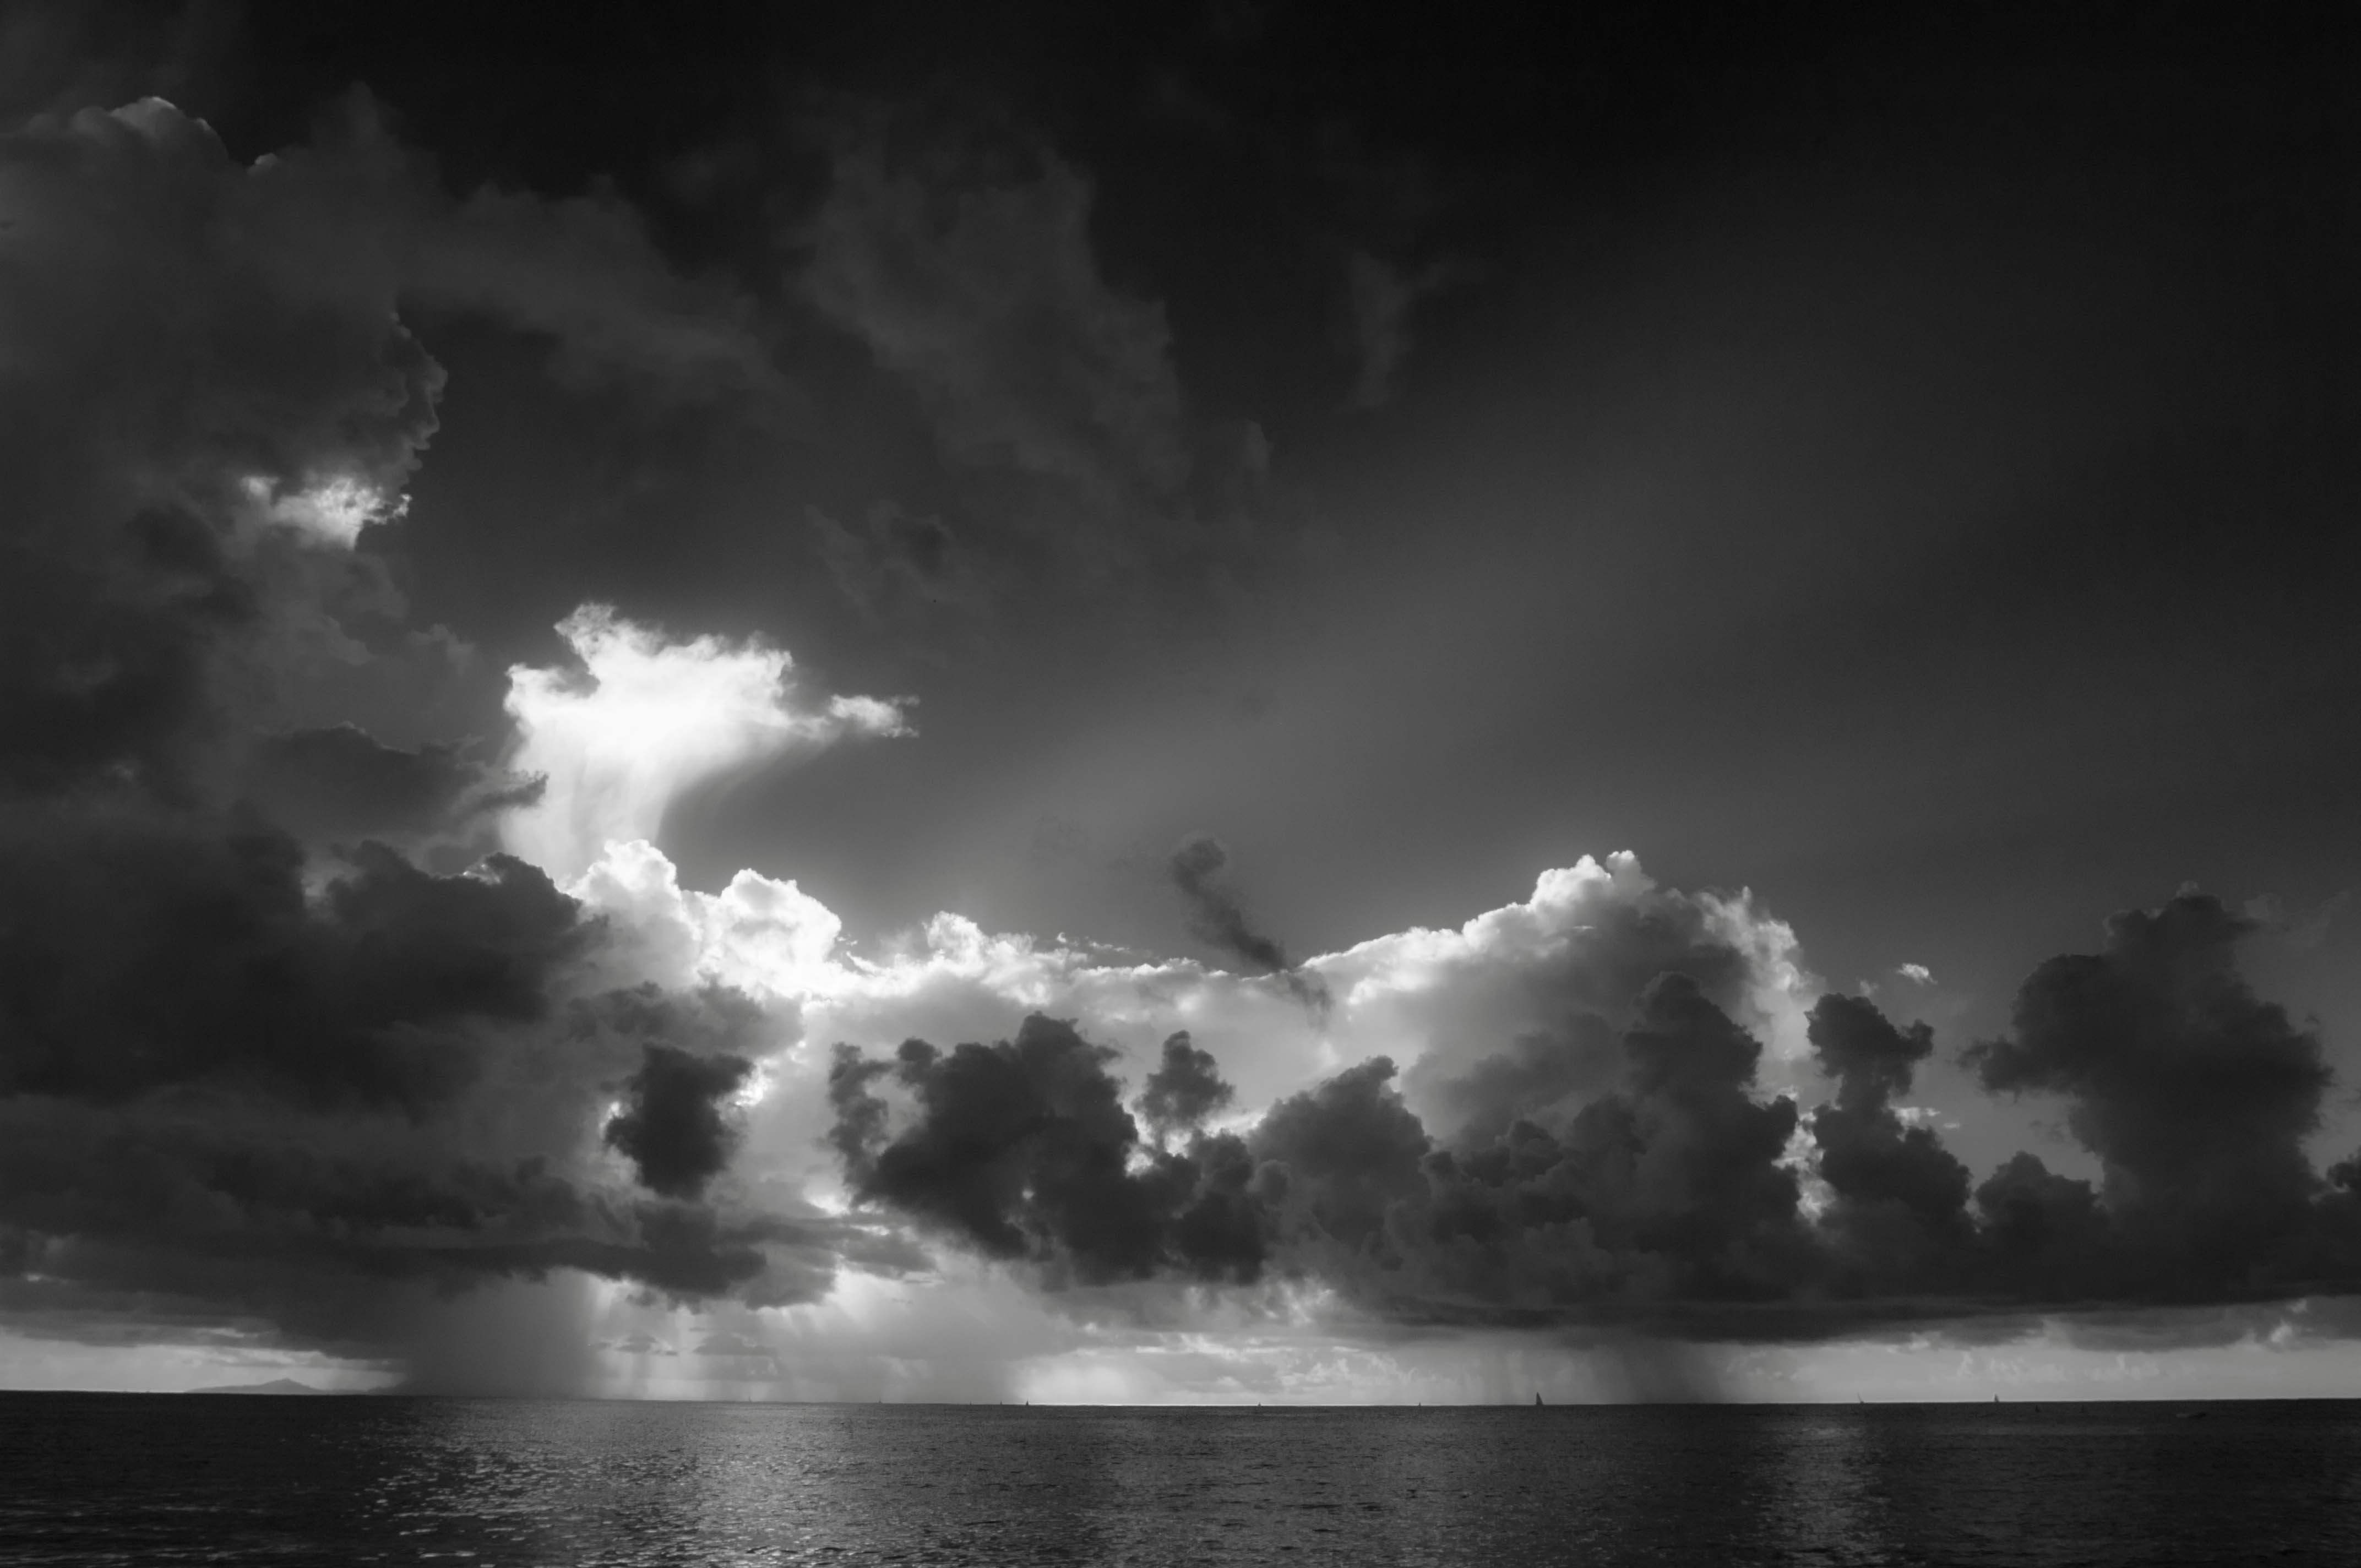 Dramatic clouds over the empty expanse of the Pacific Ocean